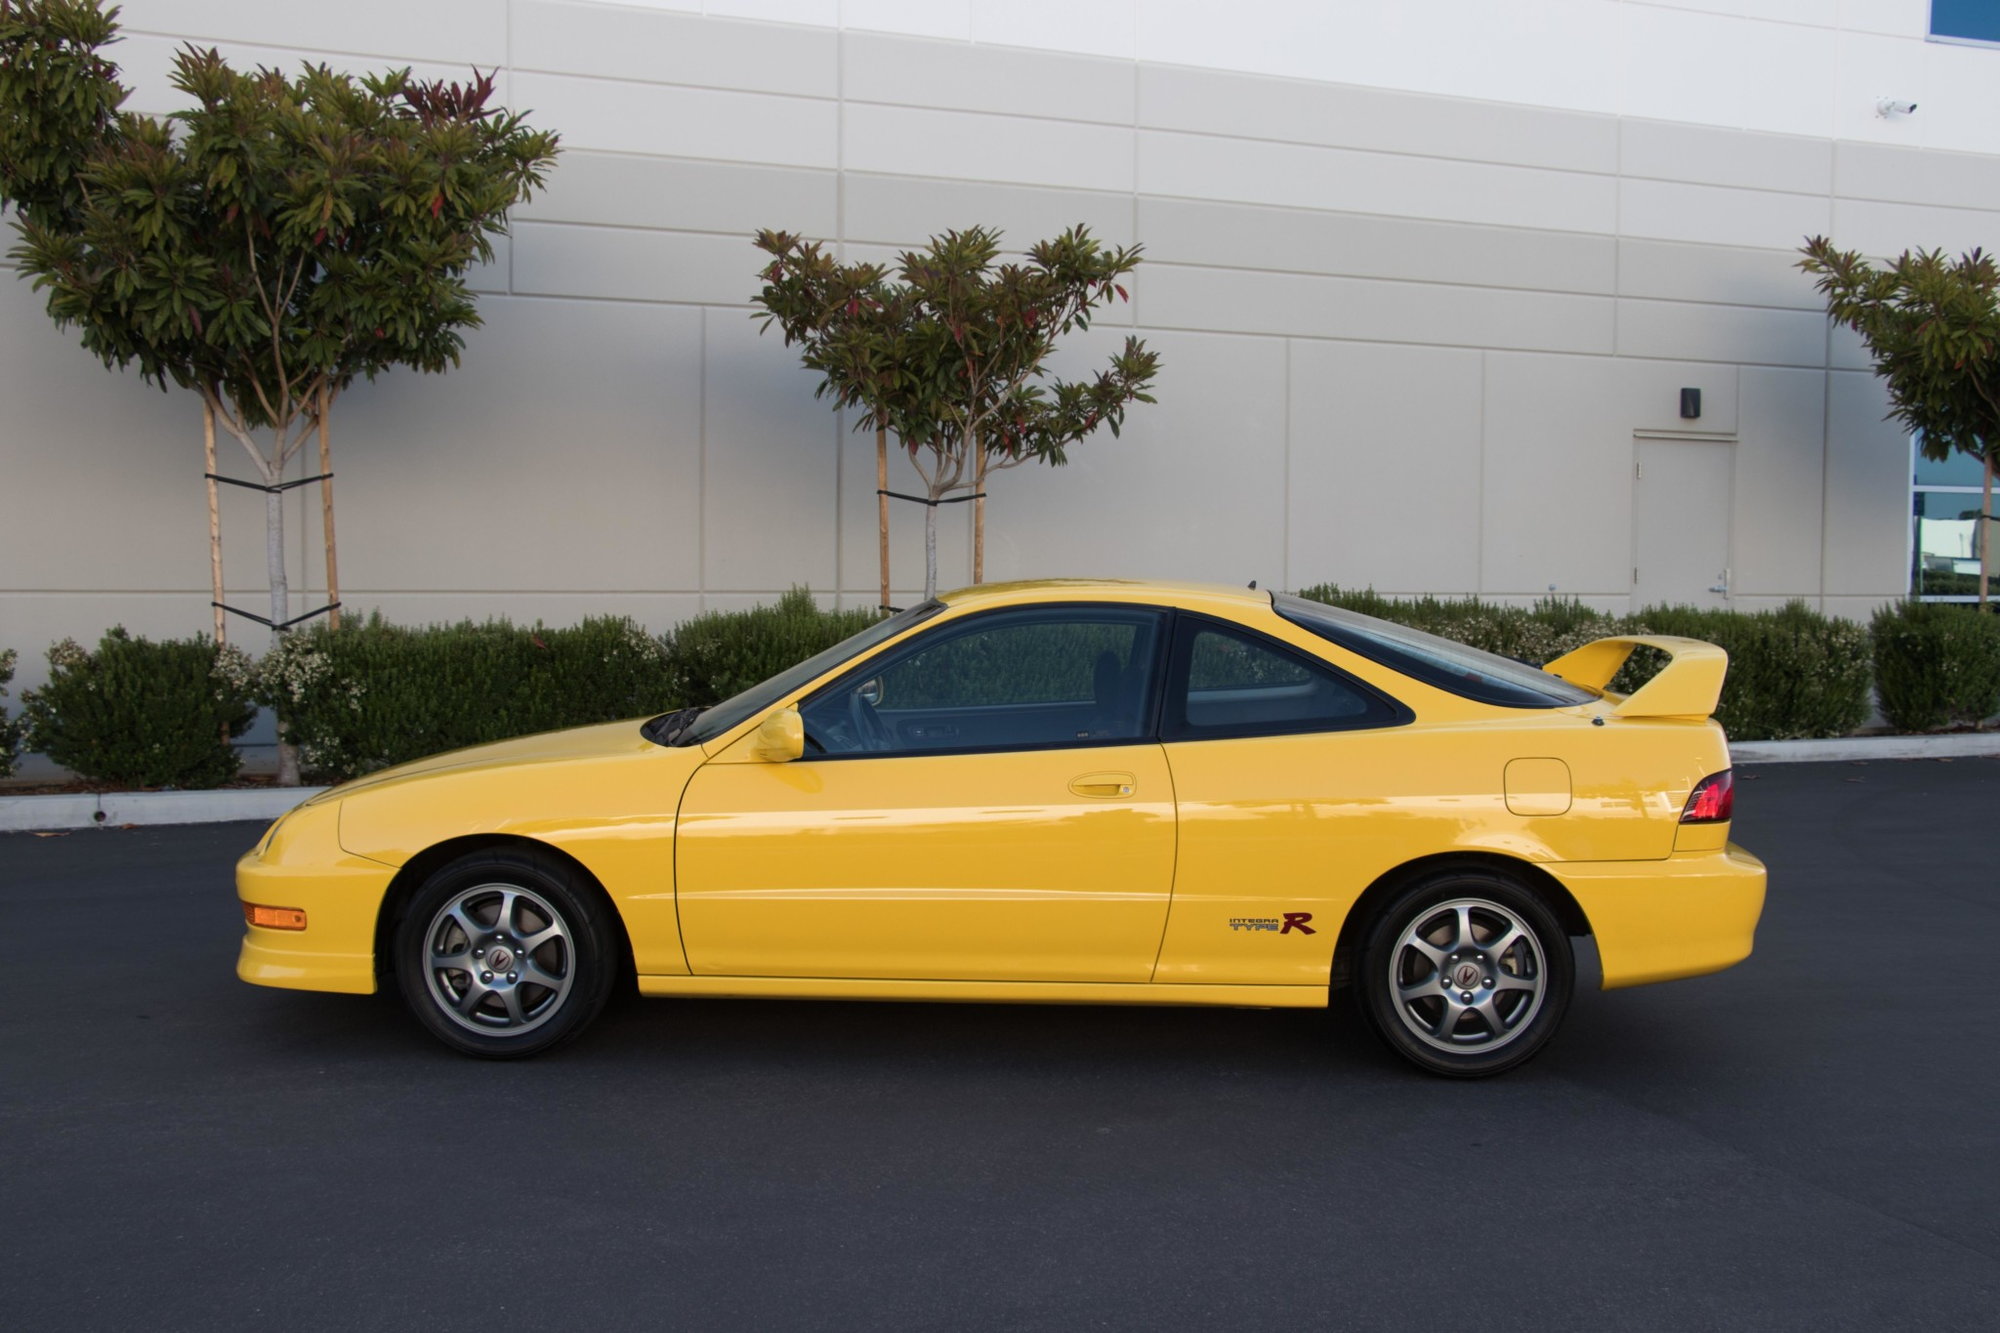 2000 Acura Integra - 2000 Acura Integra Type R *Phoenix Yellow, 47k miles, 3 Owners, original paint* - Used - VIN JH4DC2314YS005225 - 47,000 Miles - 4 cyl - 2WD - Manual - Hatchback - Yellow - Fountain Valley, CA 92708, United States